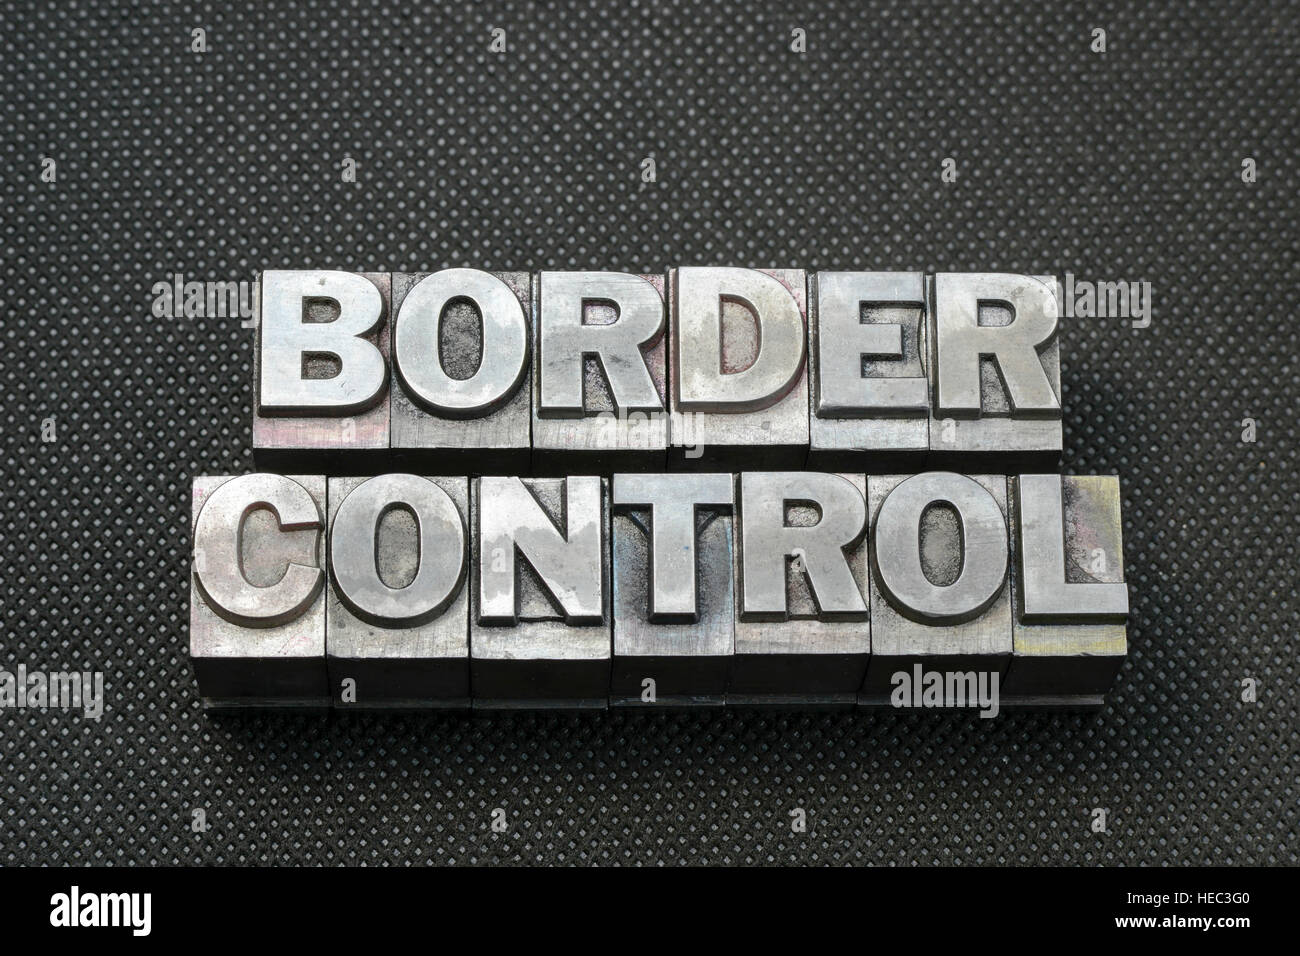 border control phrase made from metallic letterpress blocks on black perforated surface Stock Photo